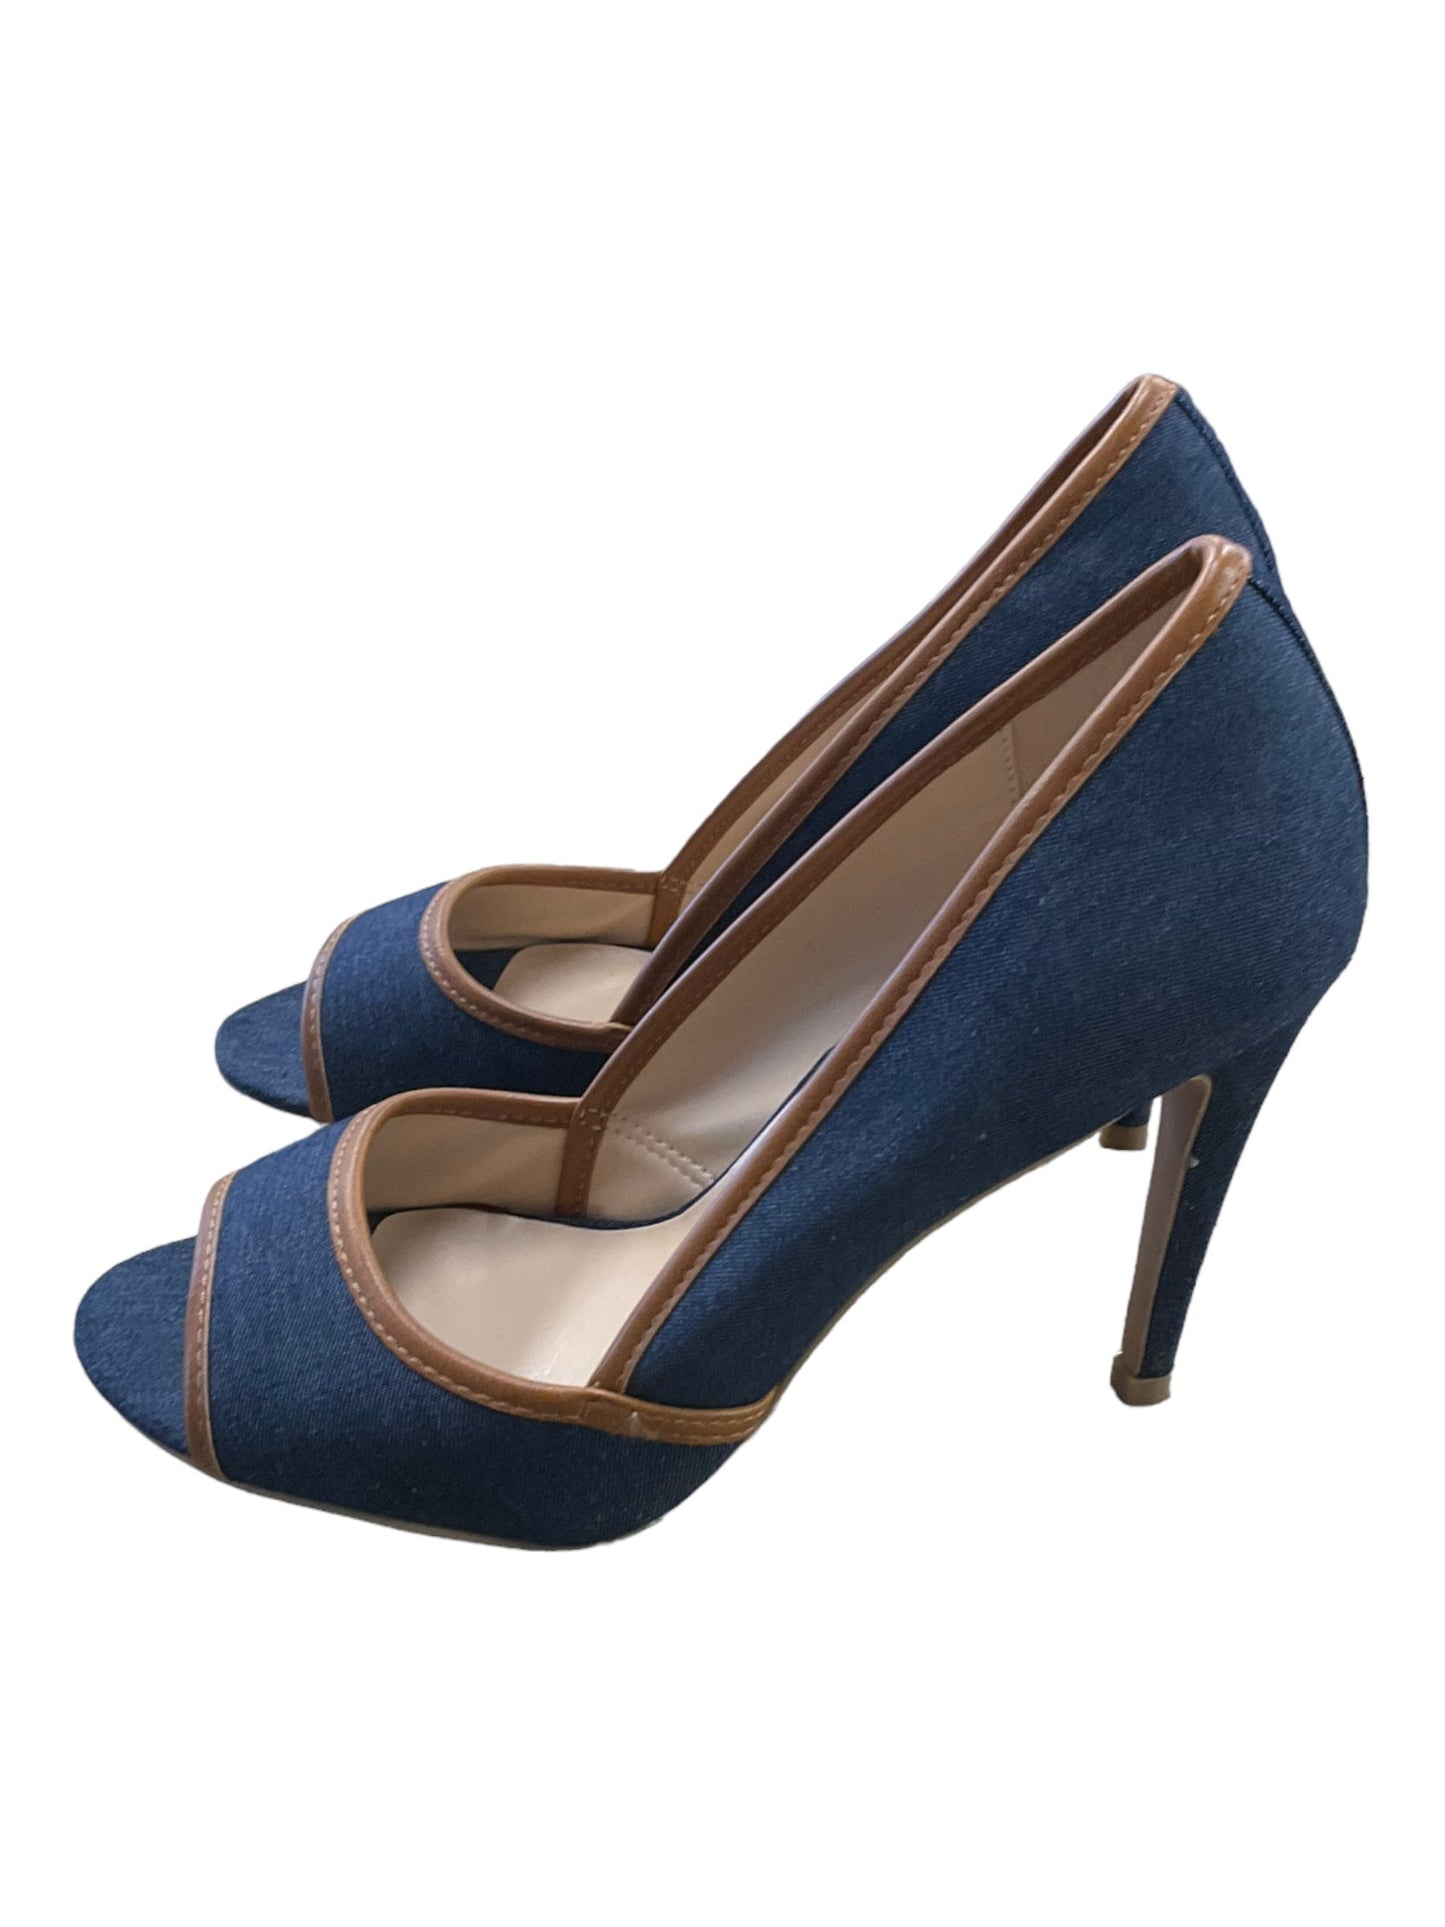 Shoes Heels Stiletto By Metaphor  Size: 7.5